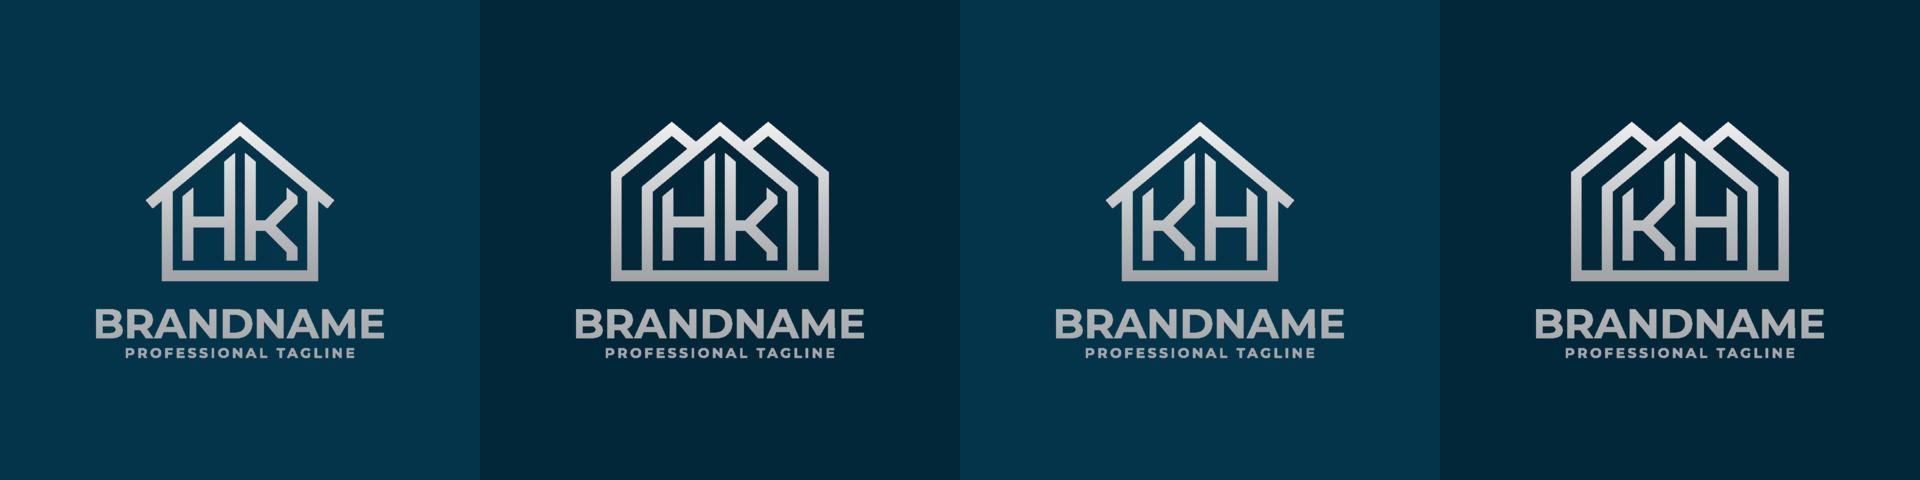 Letter HK and KH Home Logo Set. Suitable for any business related to house, real estate, construction, interior with HK or KH initials. vector